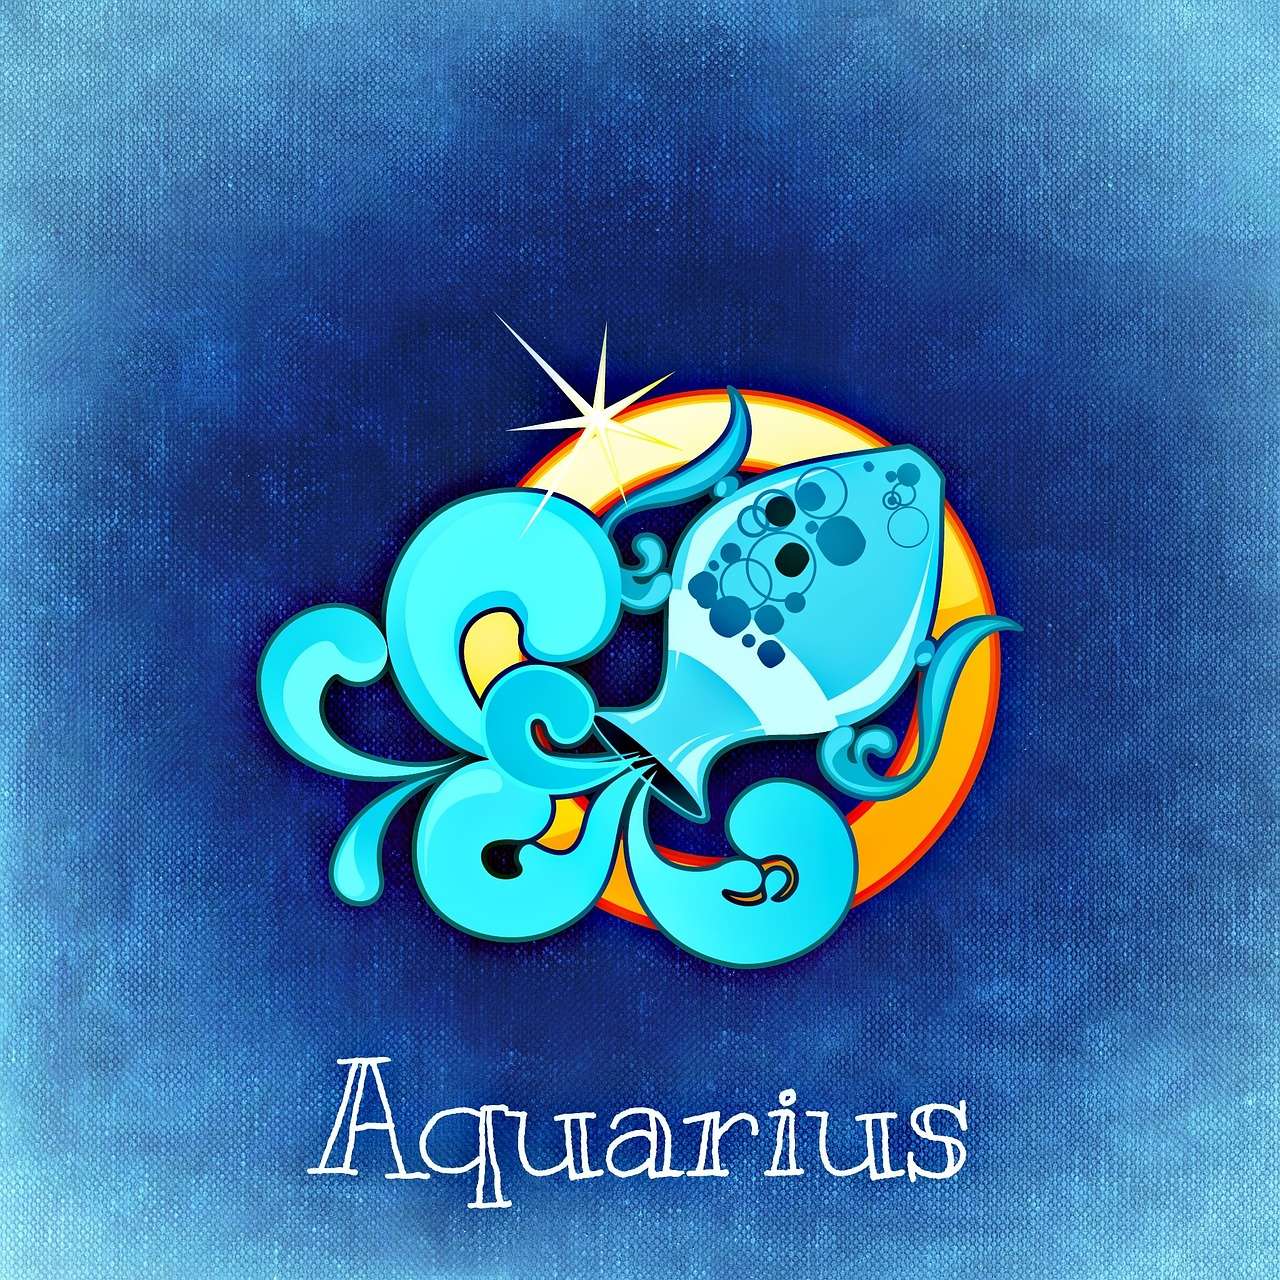 Which month is good for Aquarius?